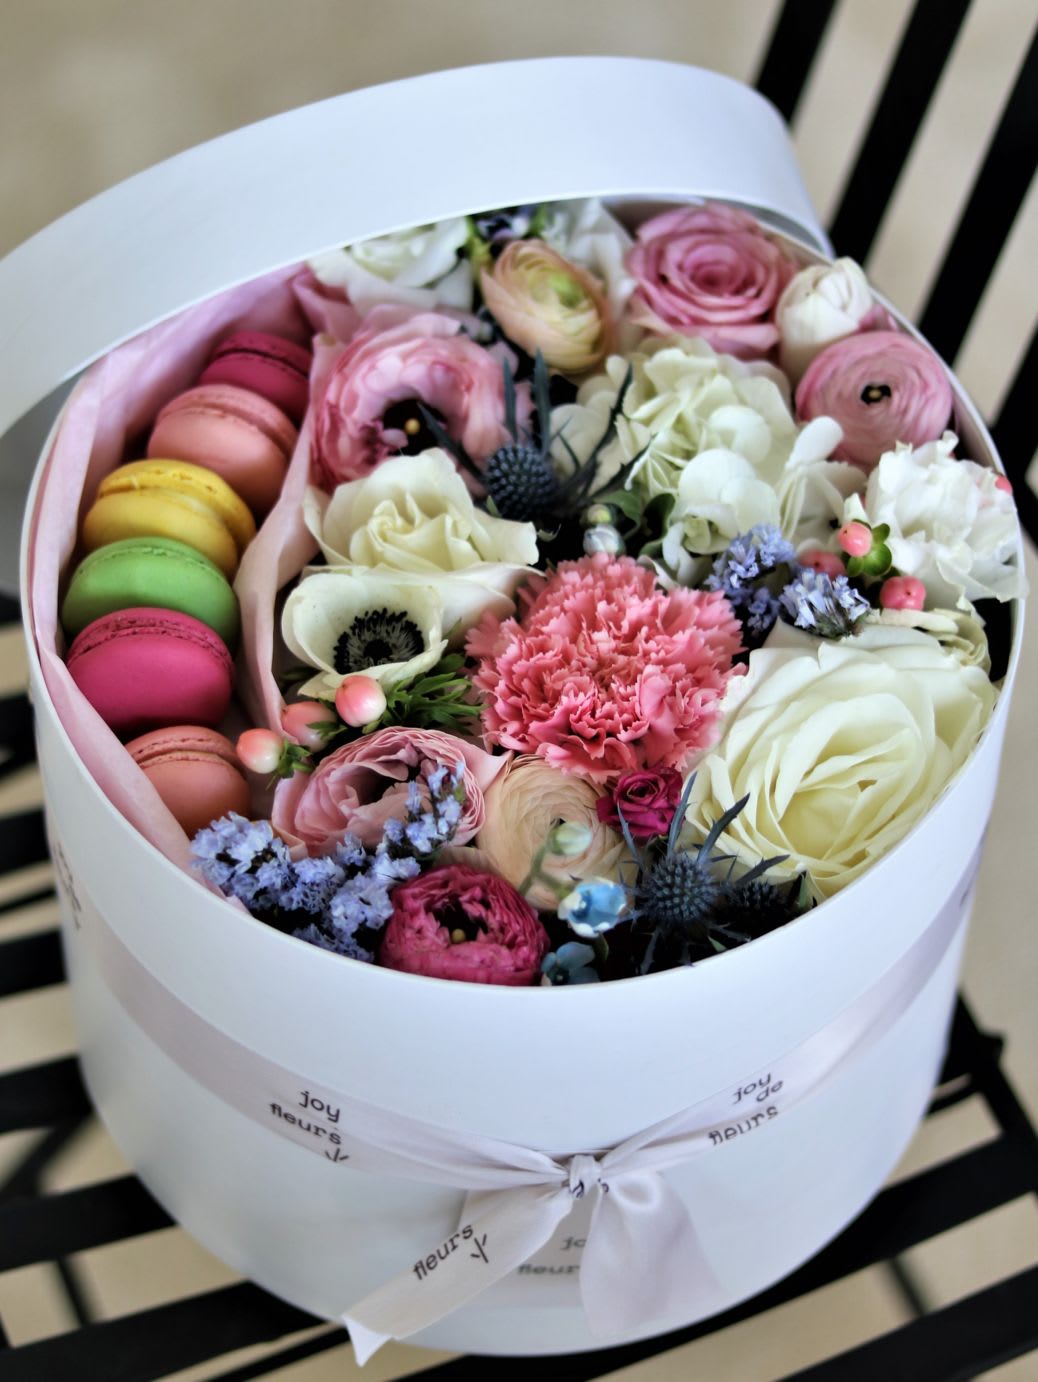 Mixed Fls Box With Macarons In